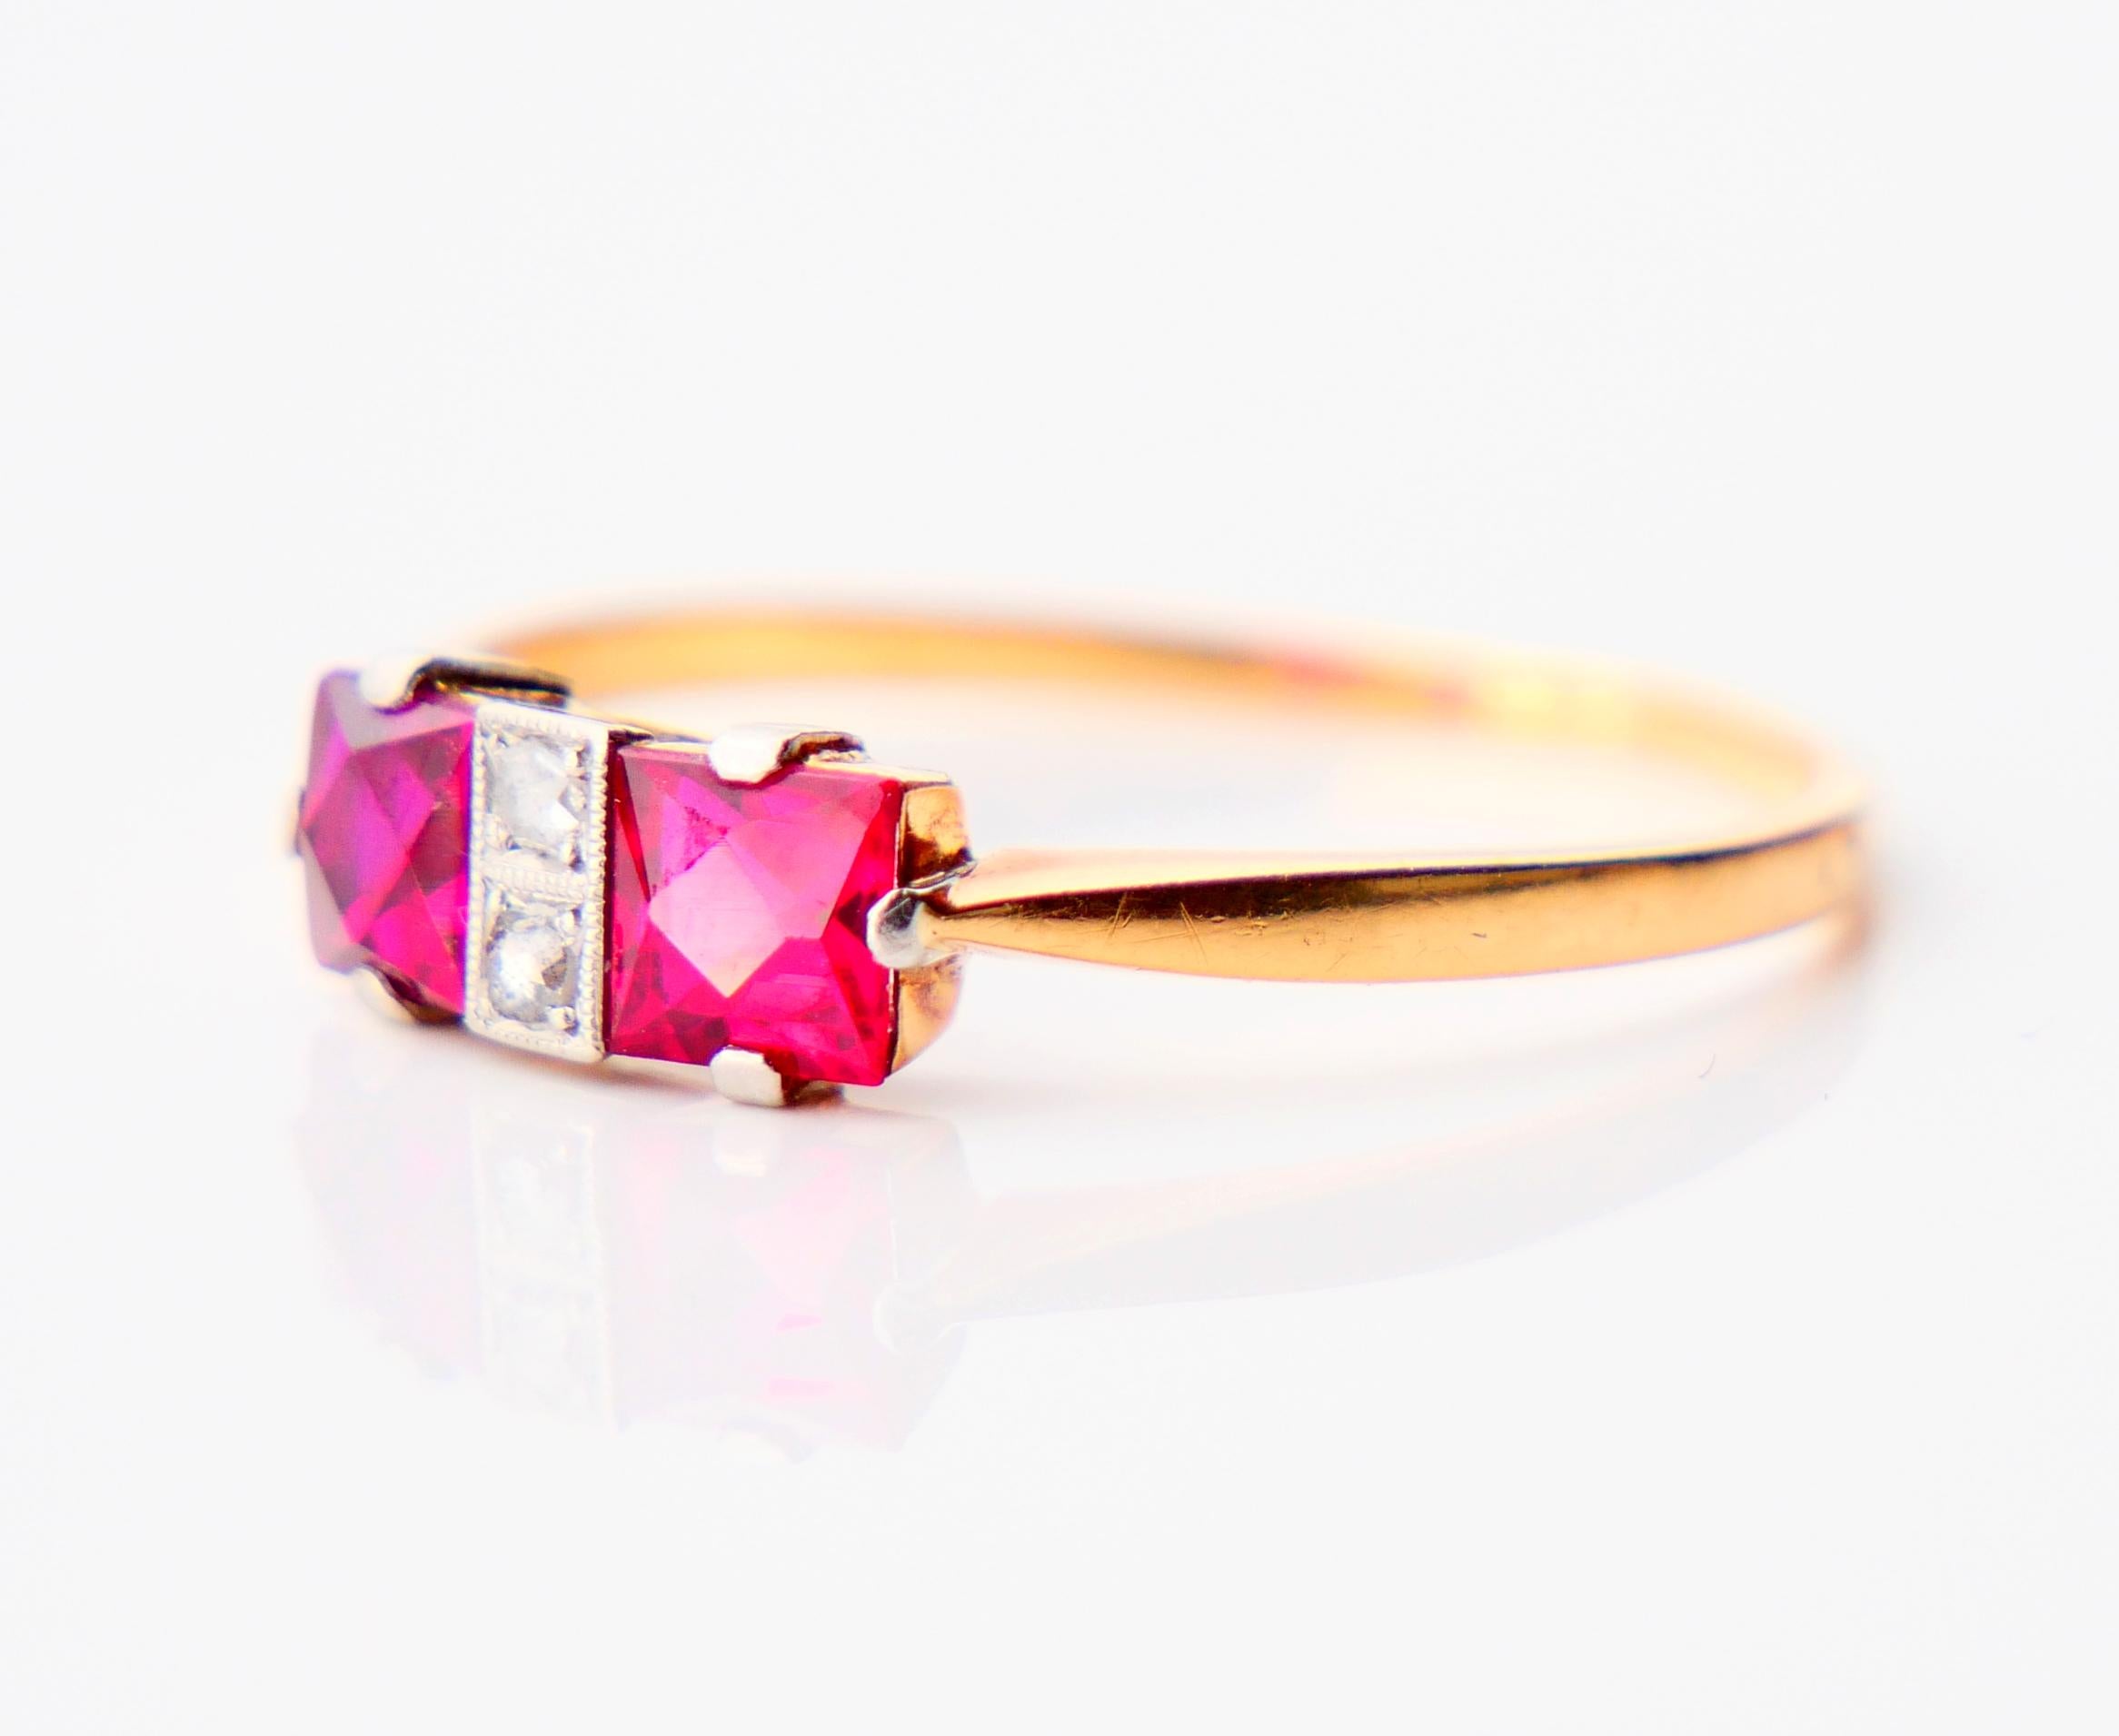 1940 Nordic 4 stones Ring Ruby Diamonds solid 18K Gold Platinum Ø US 7.75 / 1.8g For Sale 3